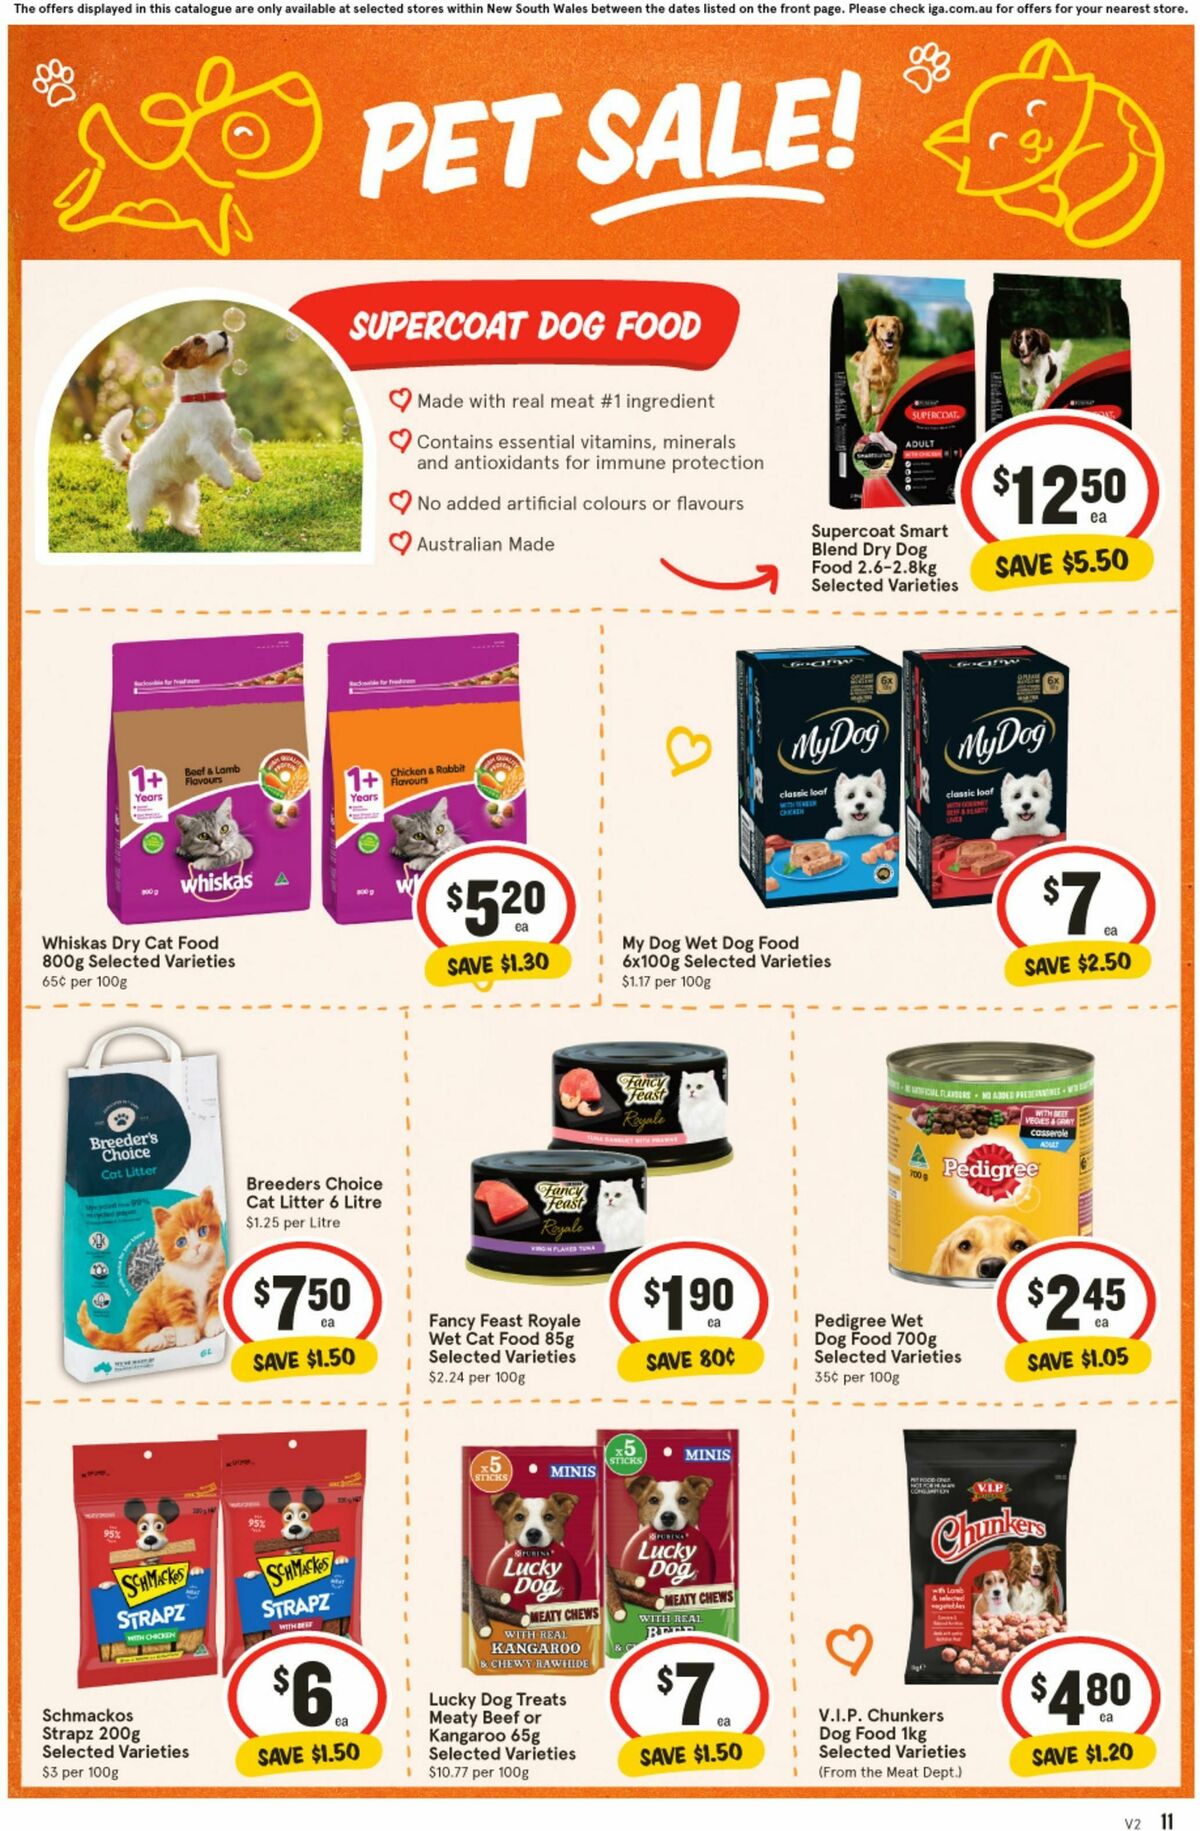 IGA Catalogues from 4 October